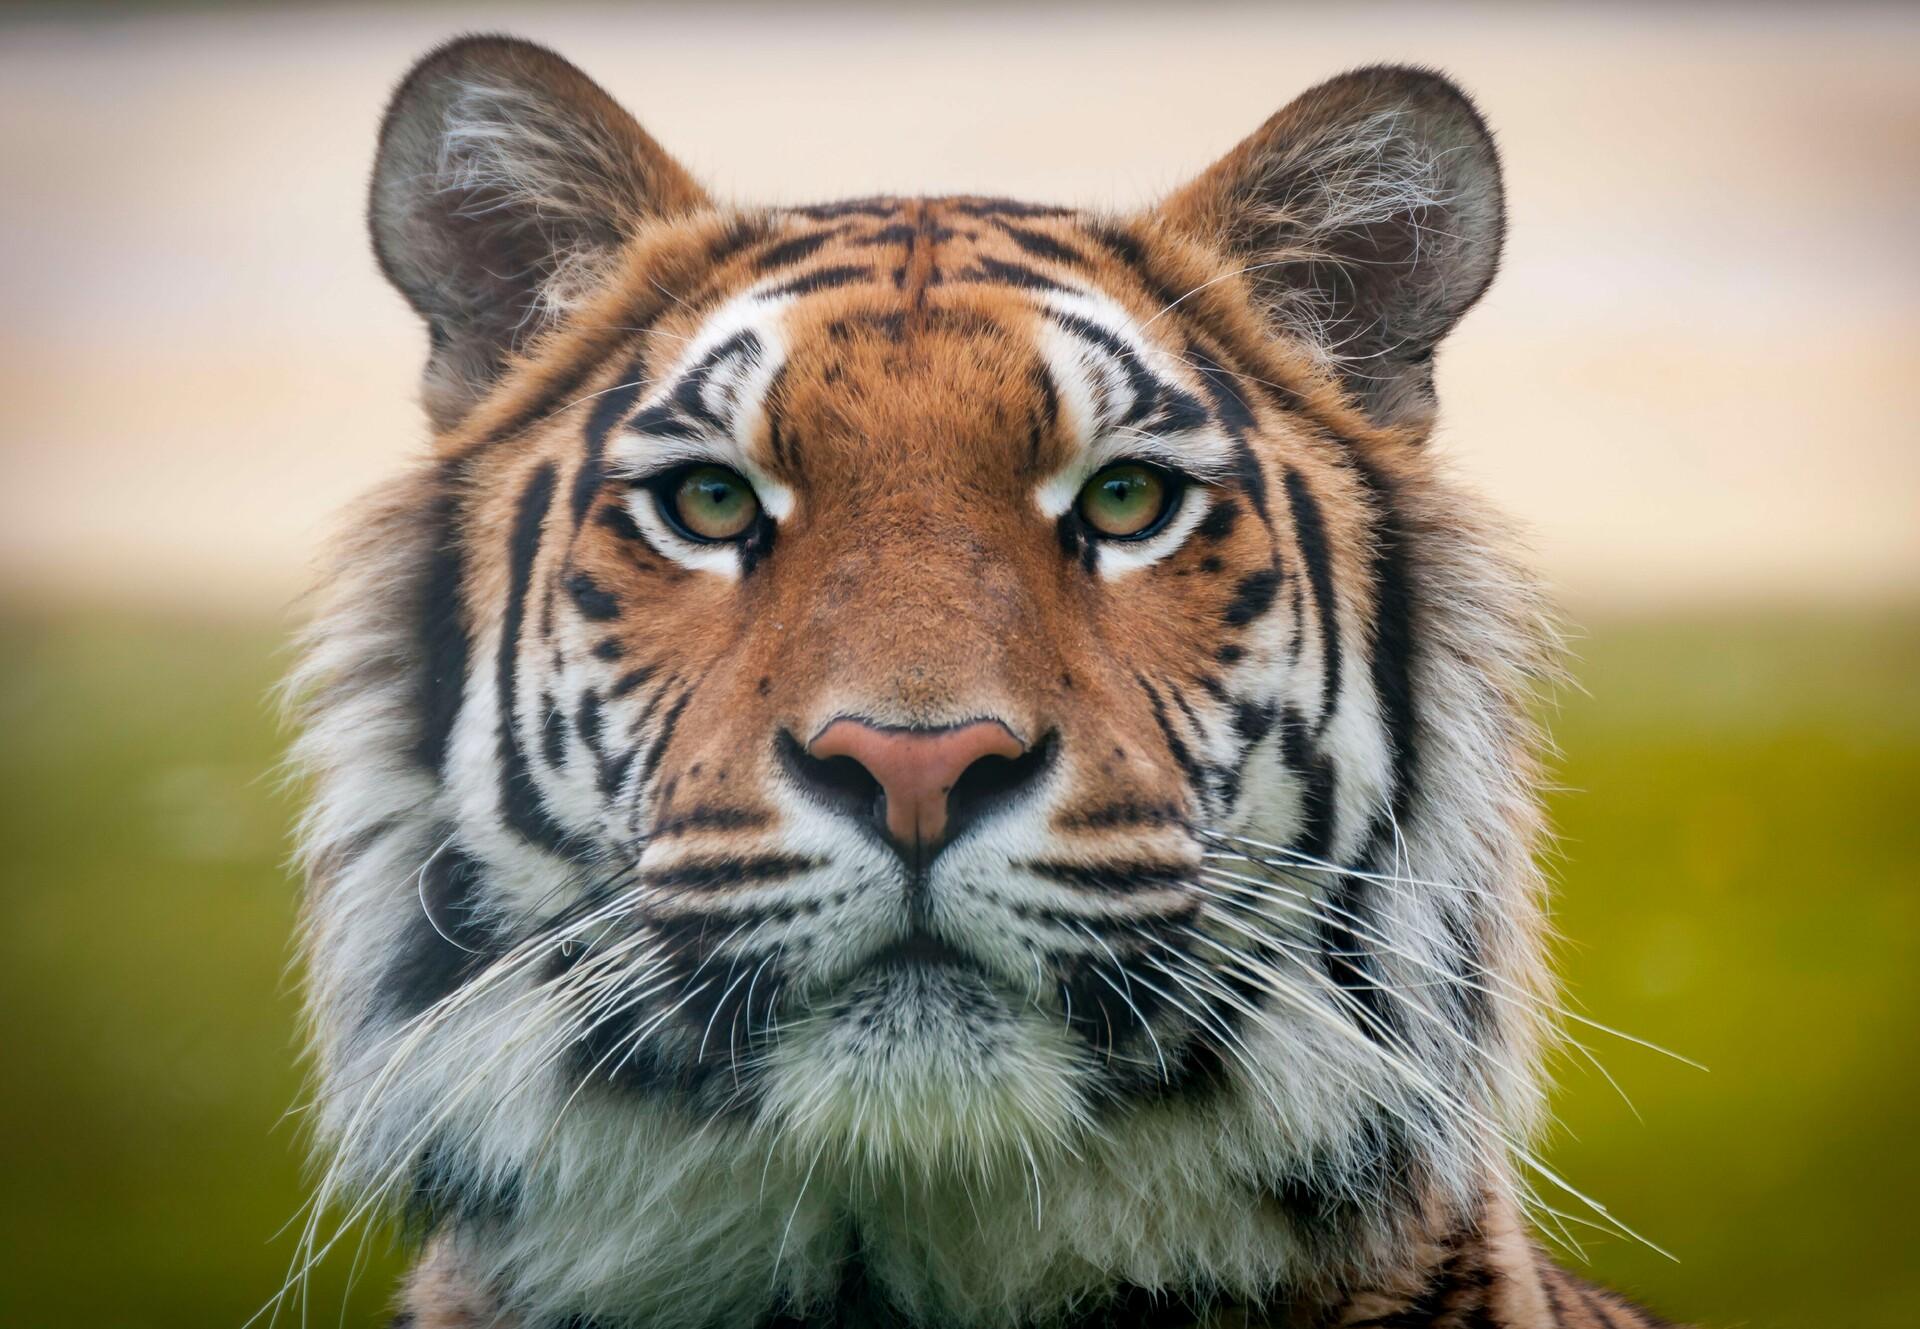 Tigers cared for by FOUR PAWS - FOUR PAWS in US - Global Animal Protection  Organization